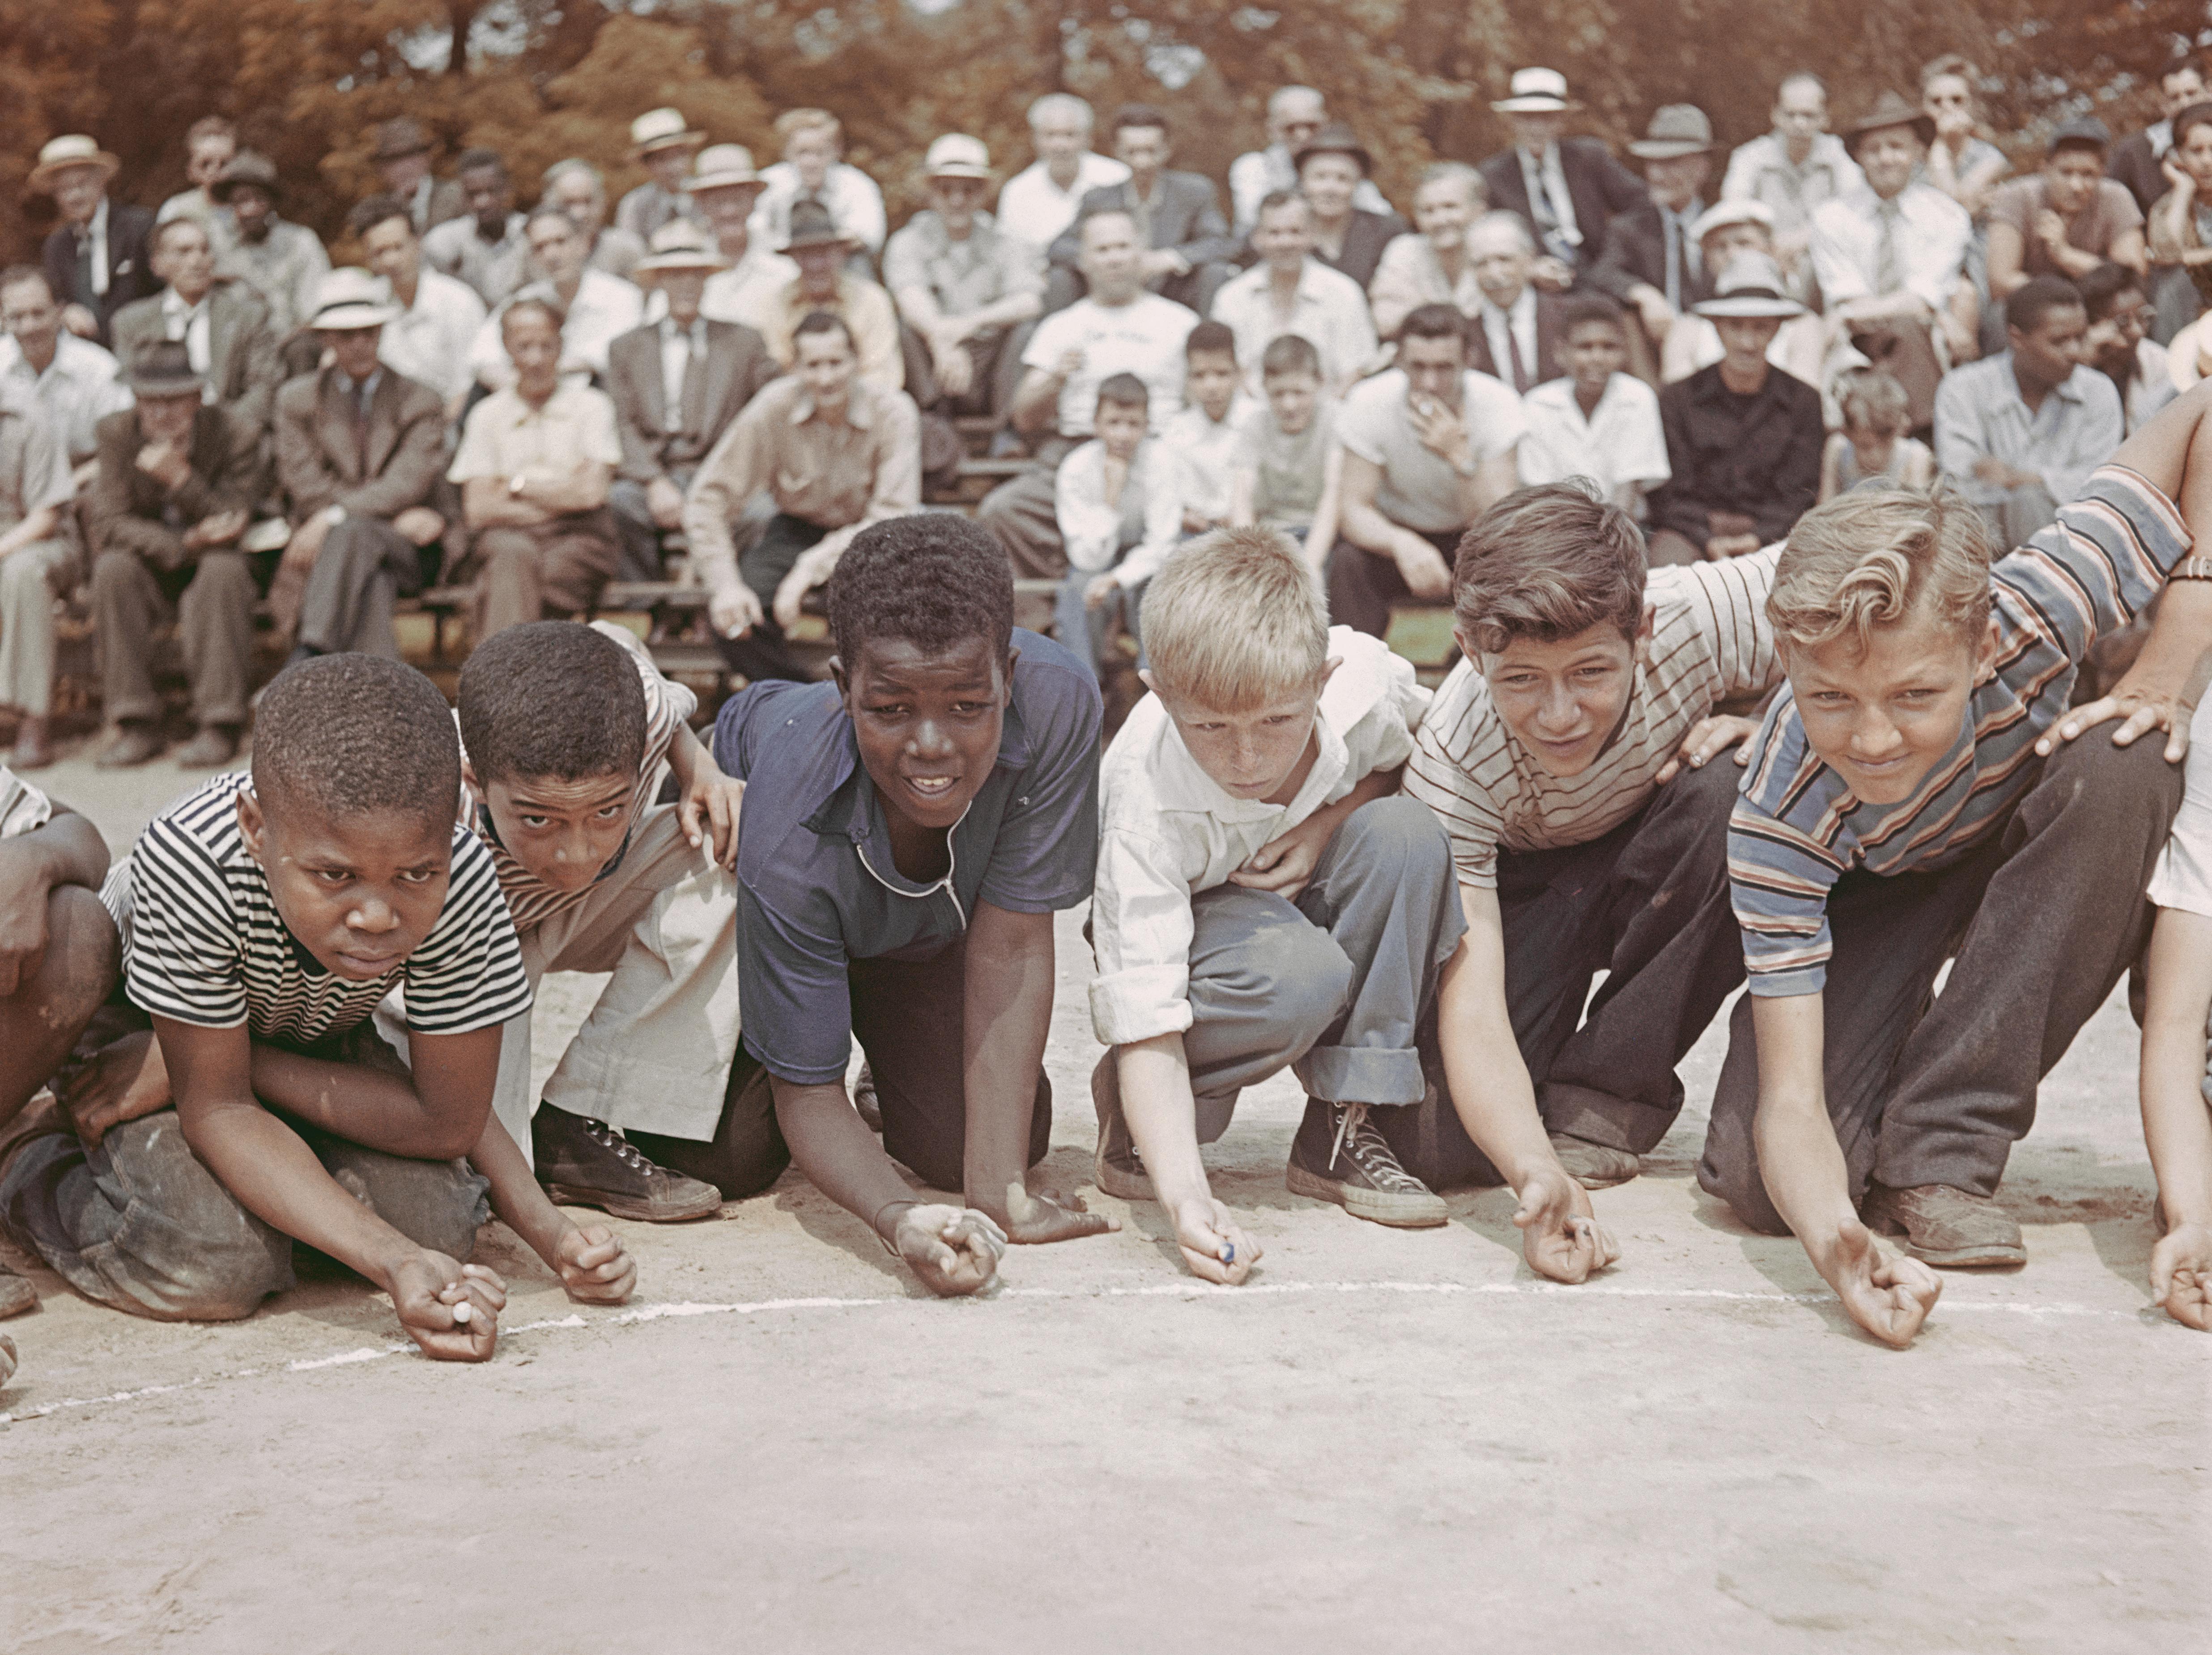 'Marbles Championship' 1947 Slim Aarons Limited Estate Edition Print 

A group of boys competing in a marble championship in Central Park, New York City, 1947. 
(Photo by Slim Aarons/Hulton Archive/Getty Images)

Produced from the original